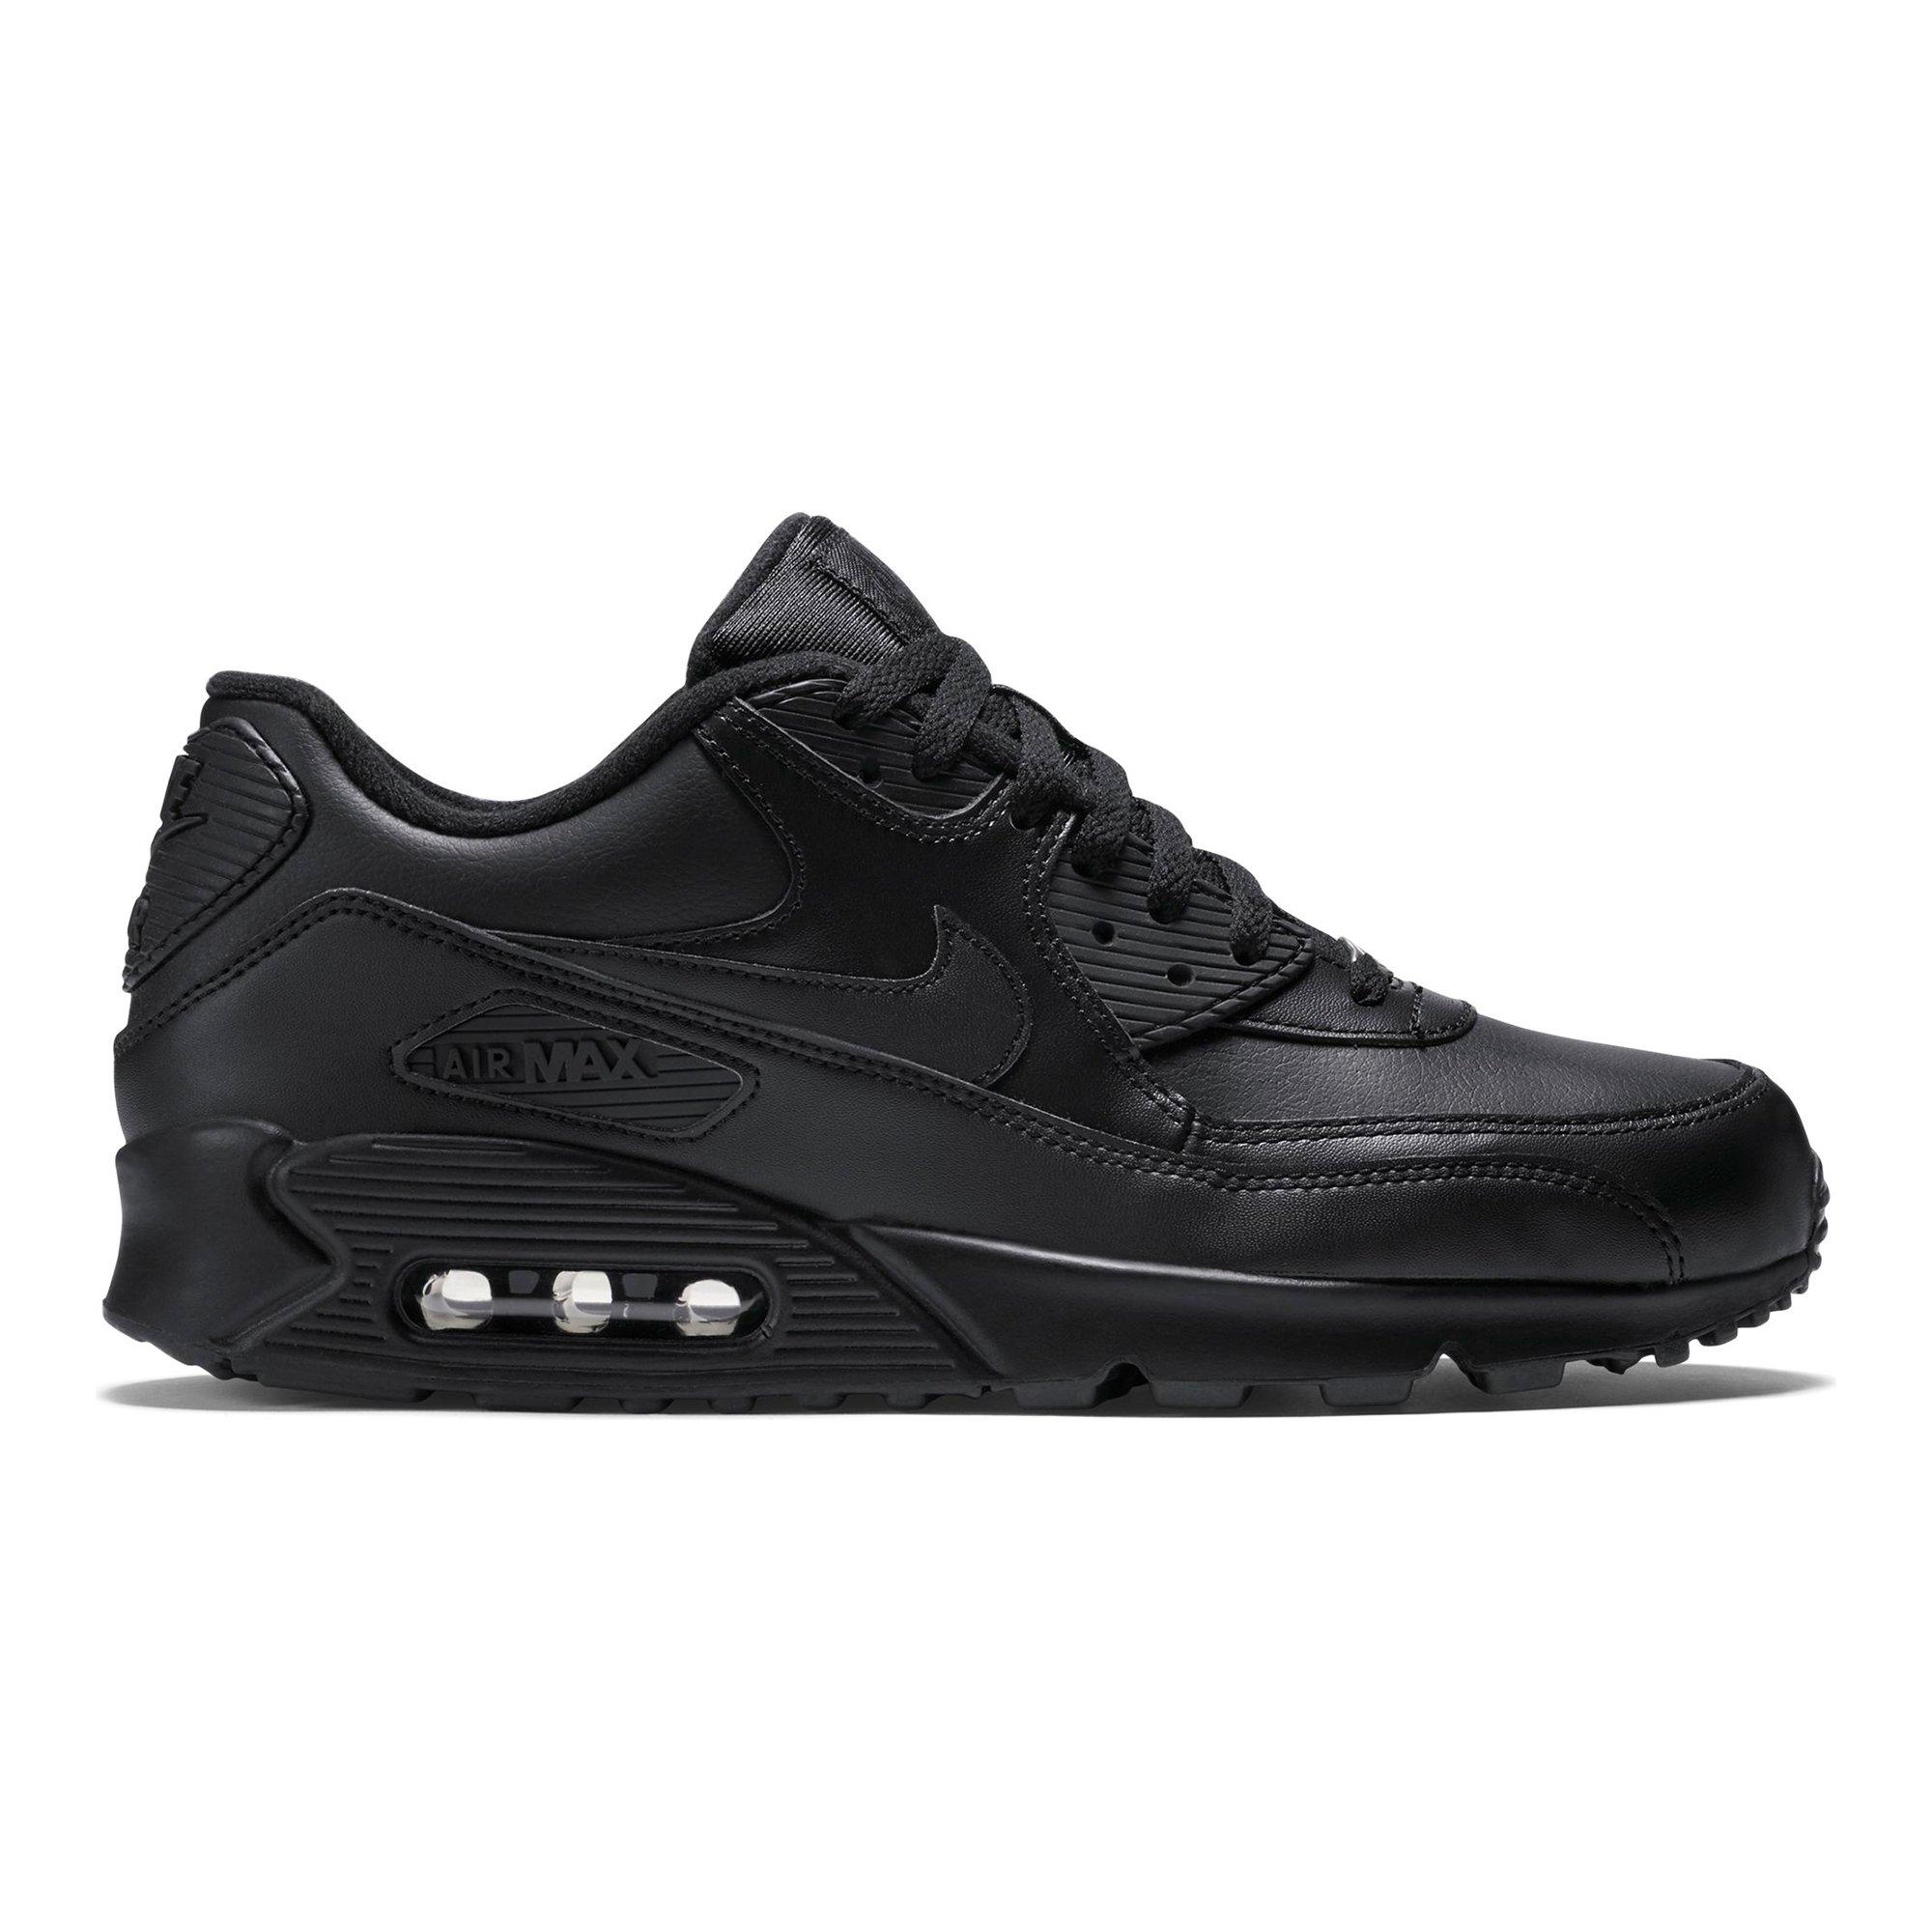 air max 90 leather nere